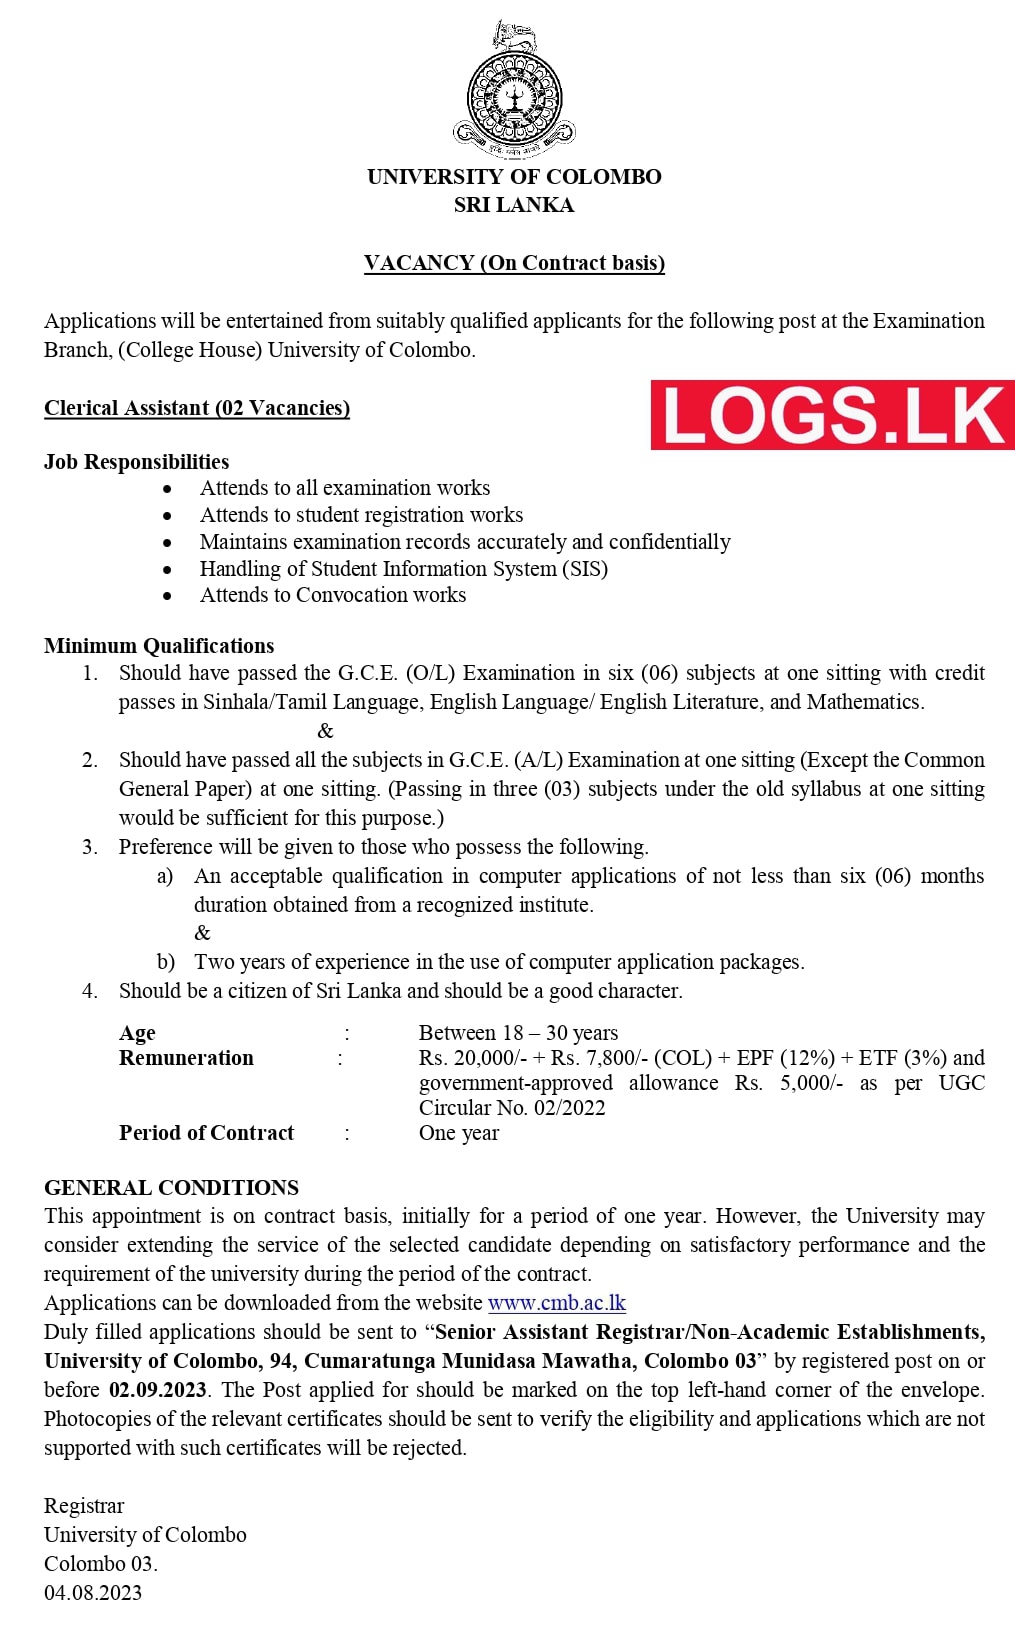 Clerical Assistant - University of Colombo Vacancies 2023 Application Form